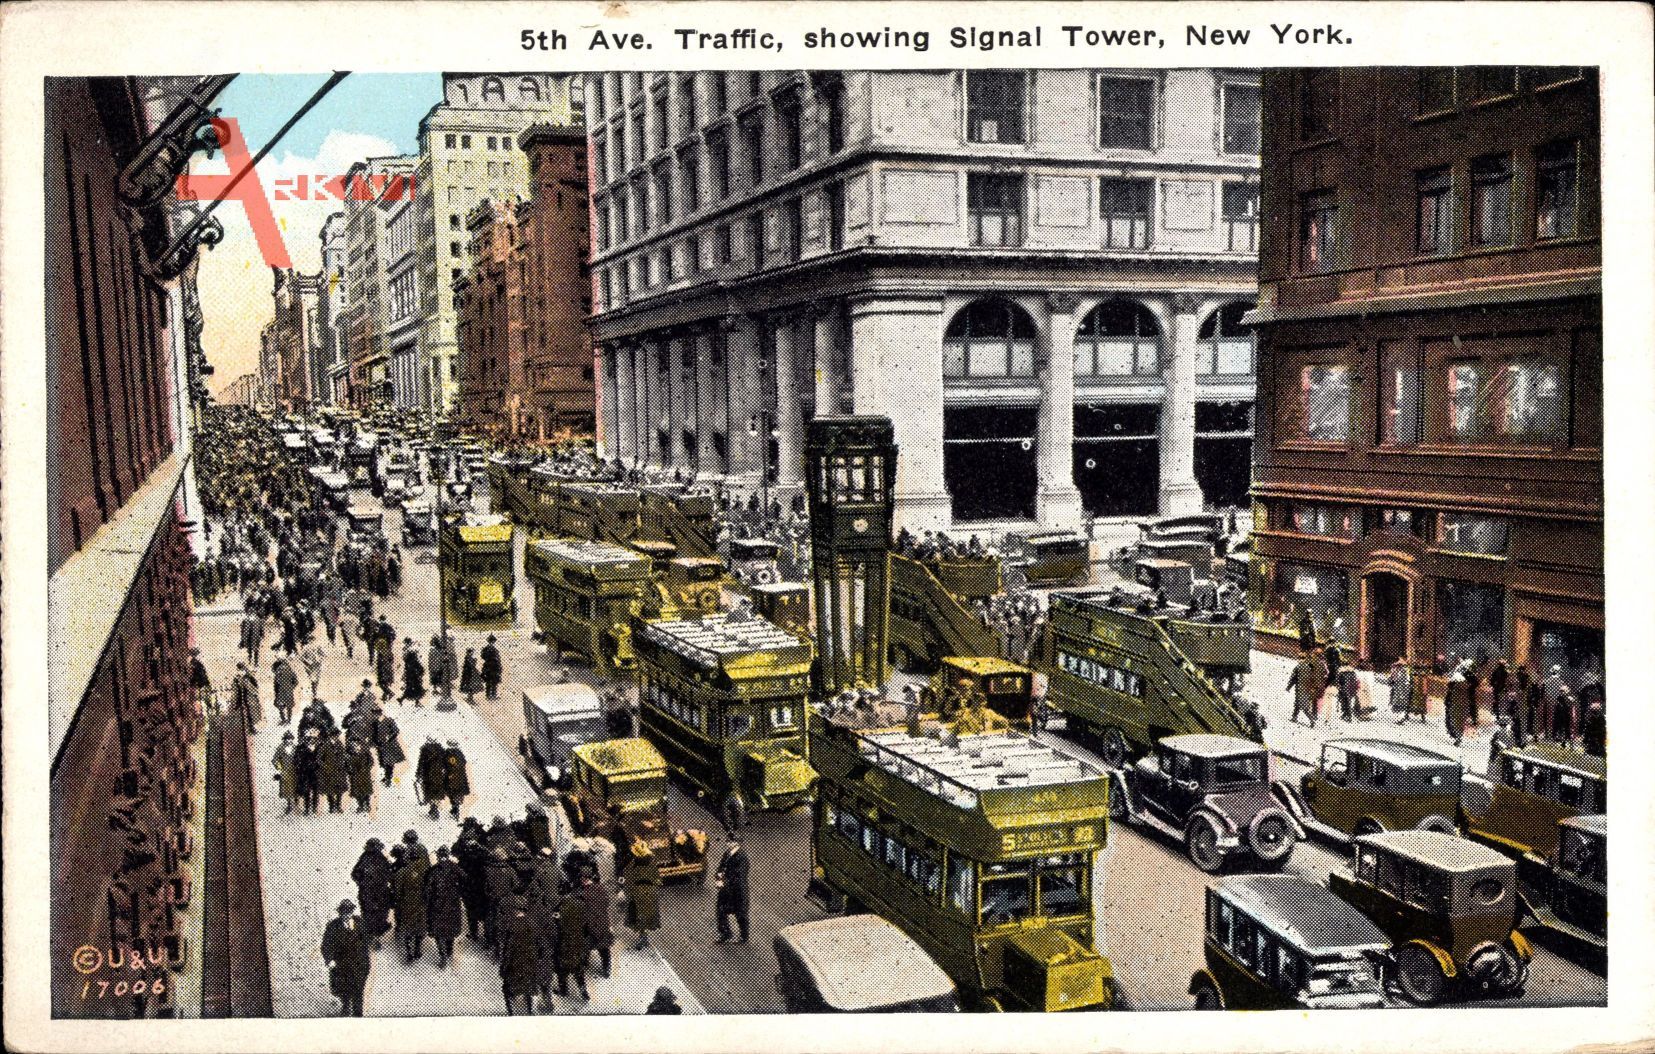 New York USA, 5th Avenue Traffic showing Signal Tower